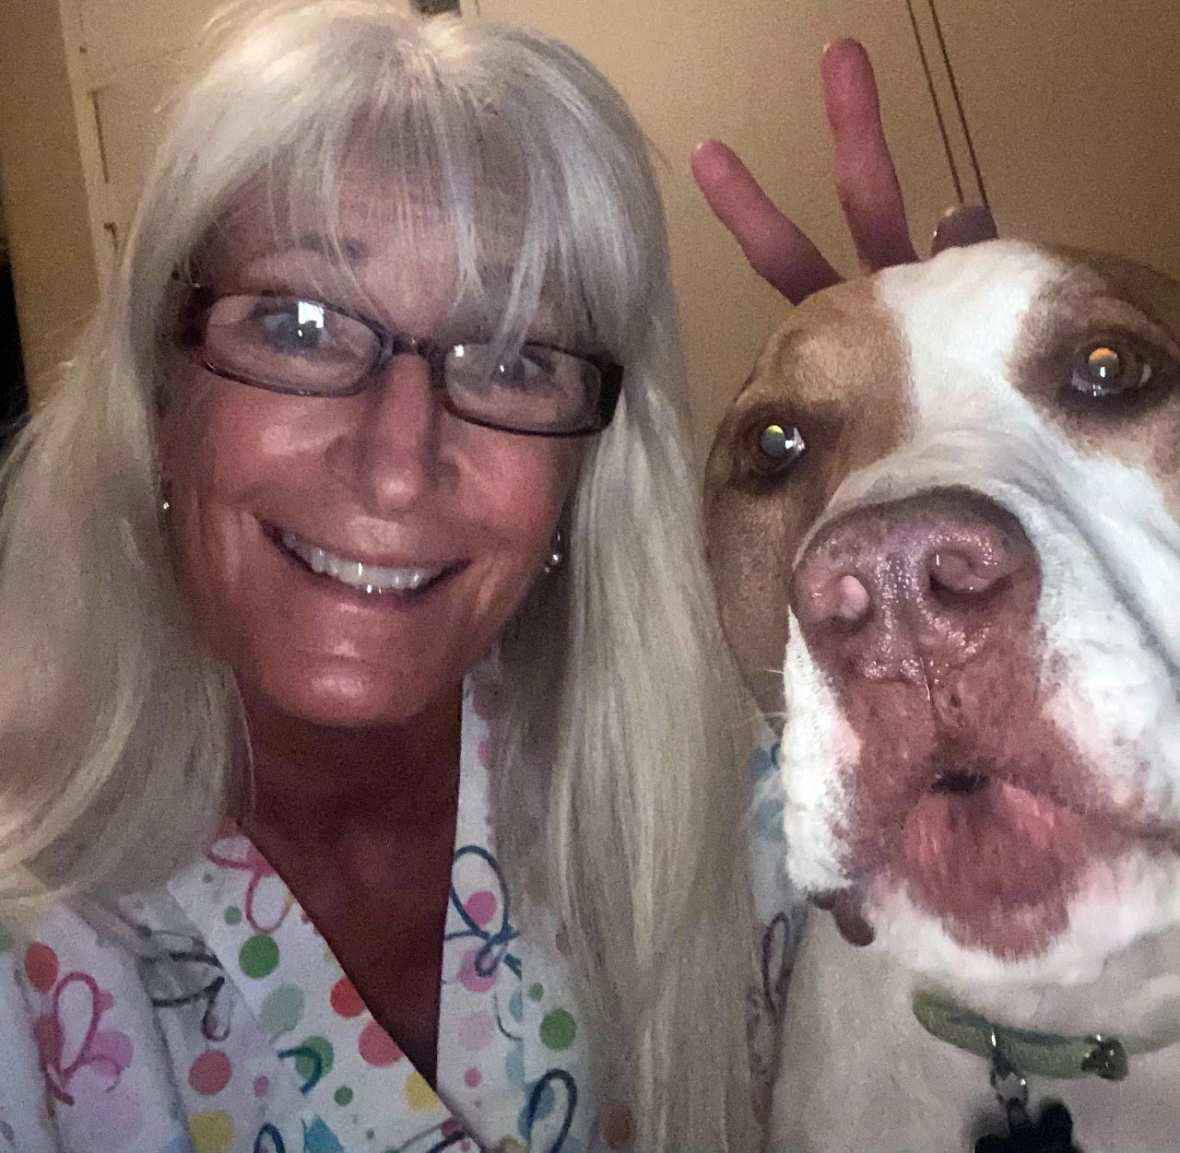 A selfie of a female dog owner with her dog